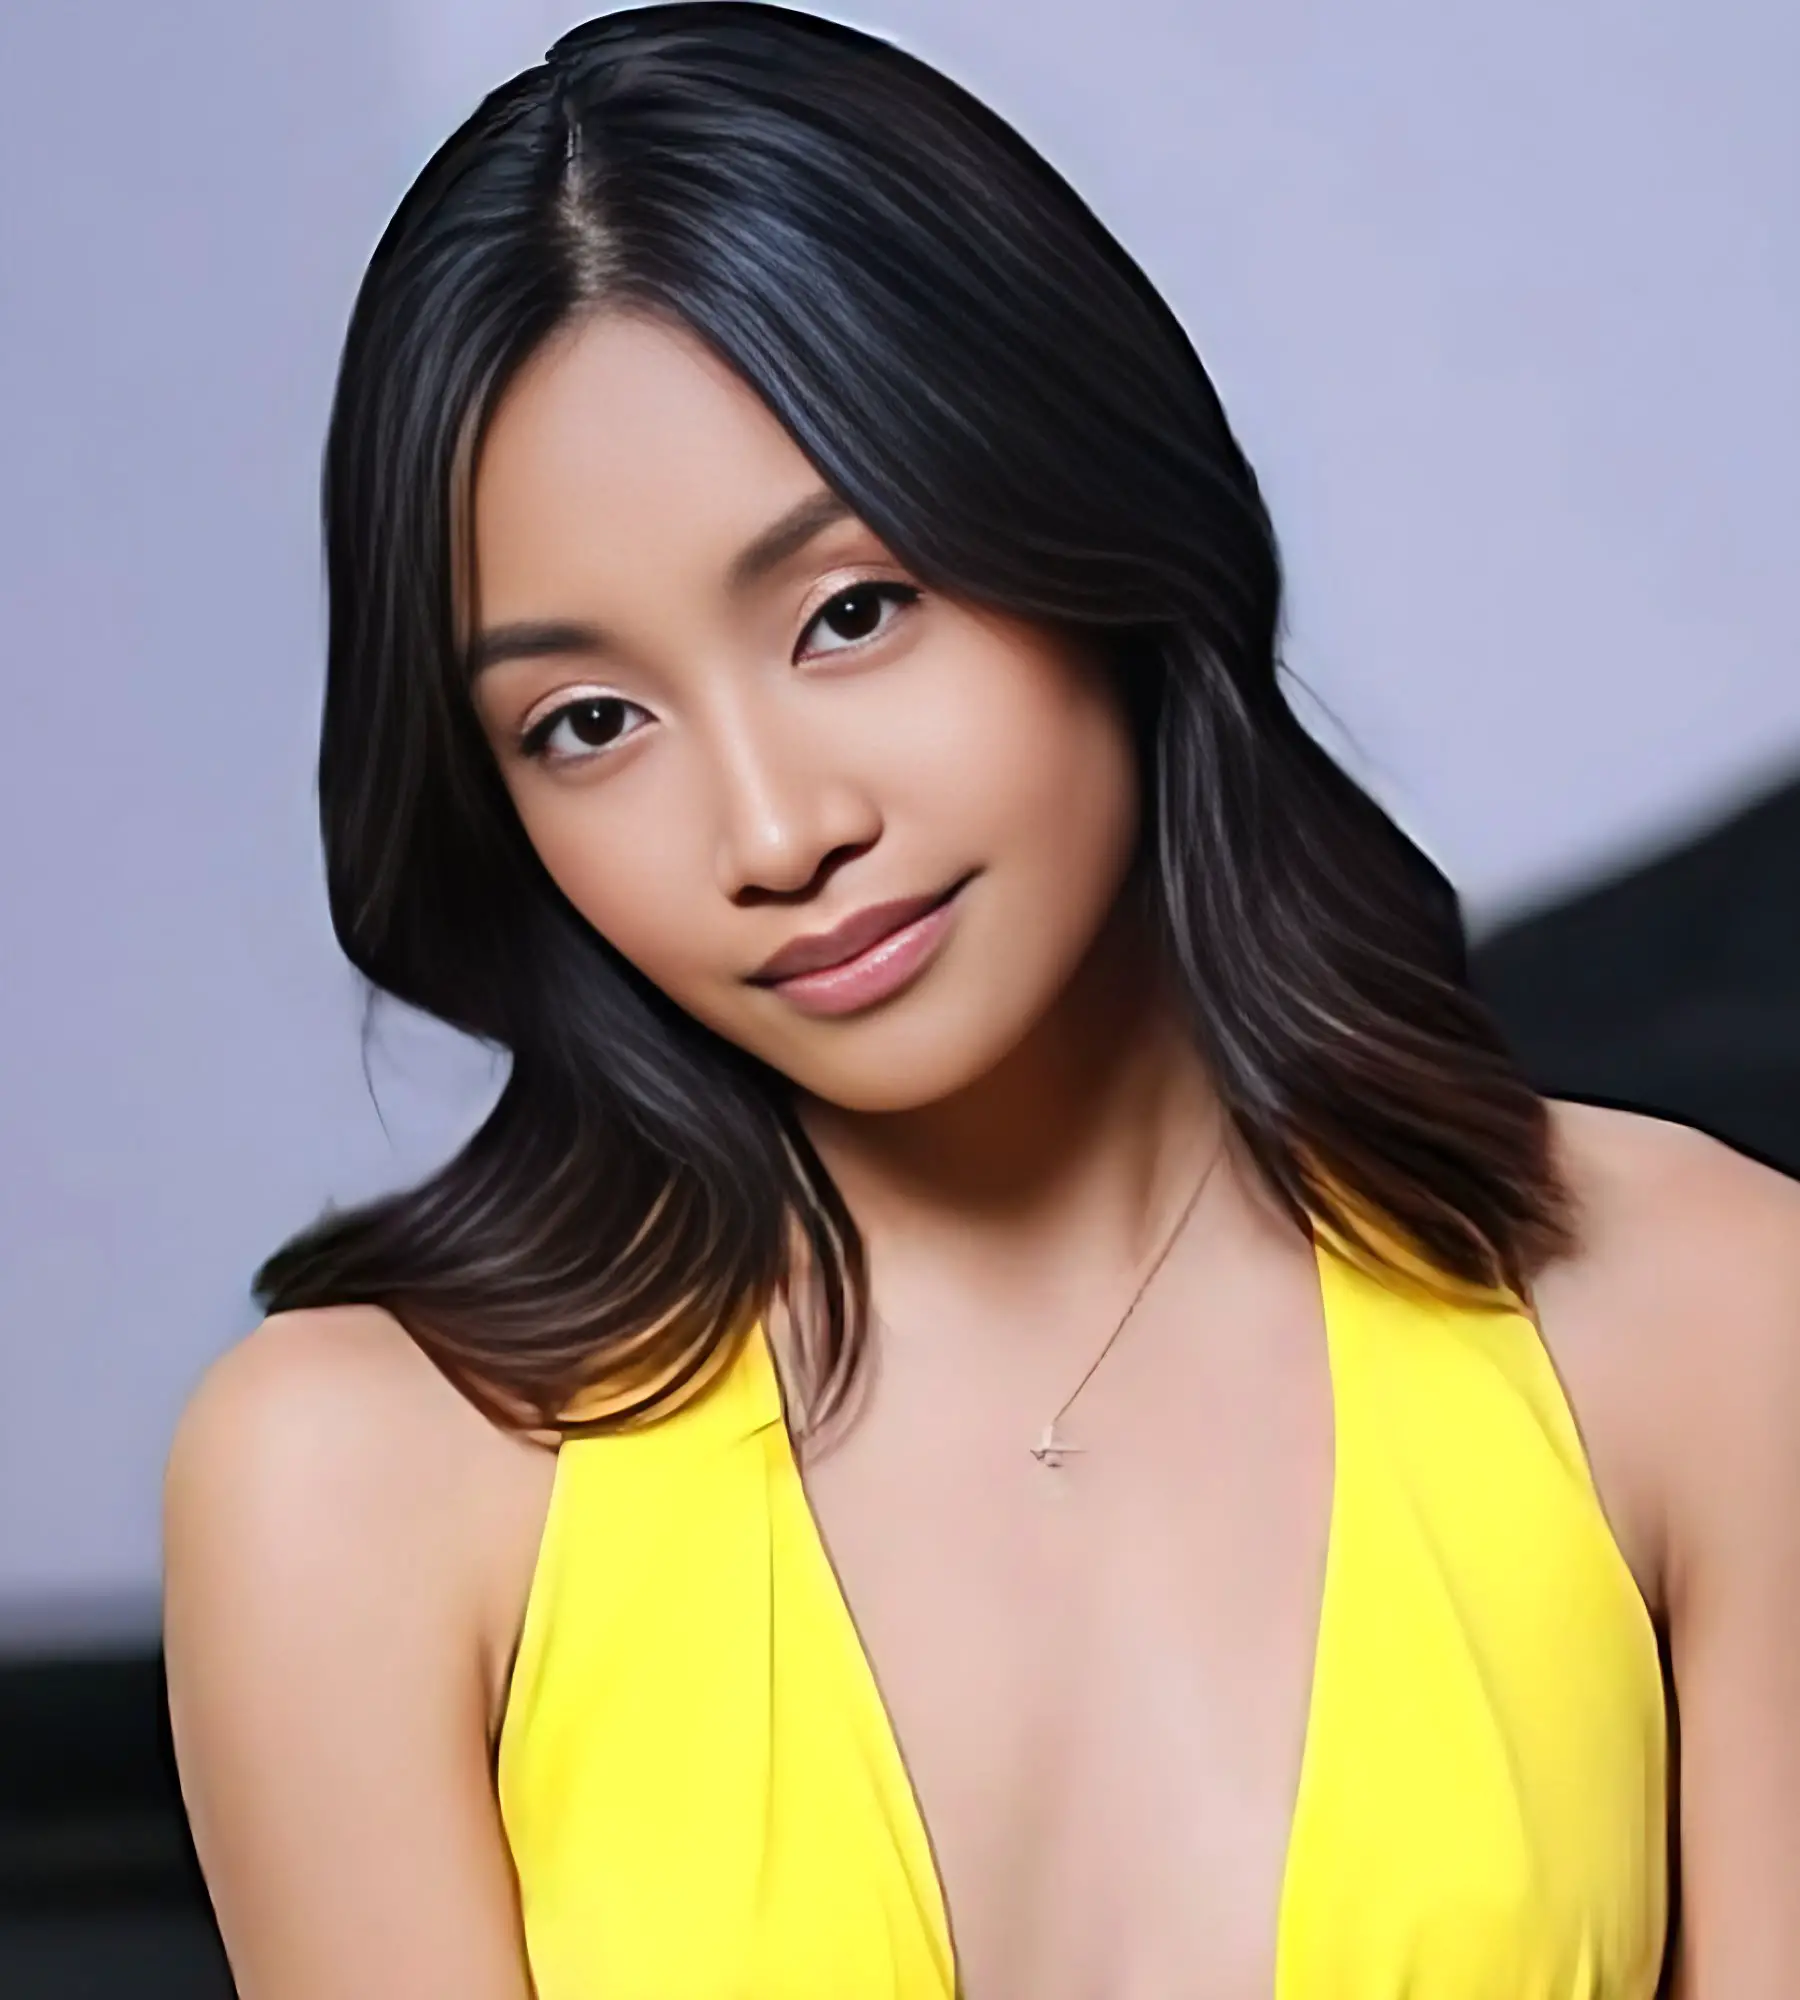 Jade Kimiko Actress Wikipedia Age Height Weight Videos Biography And More